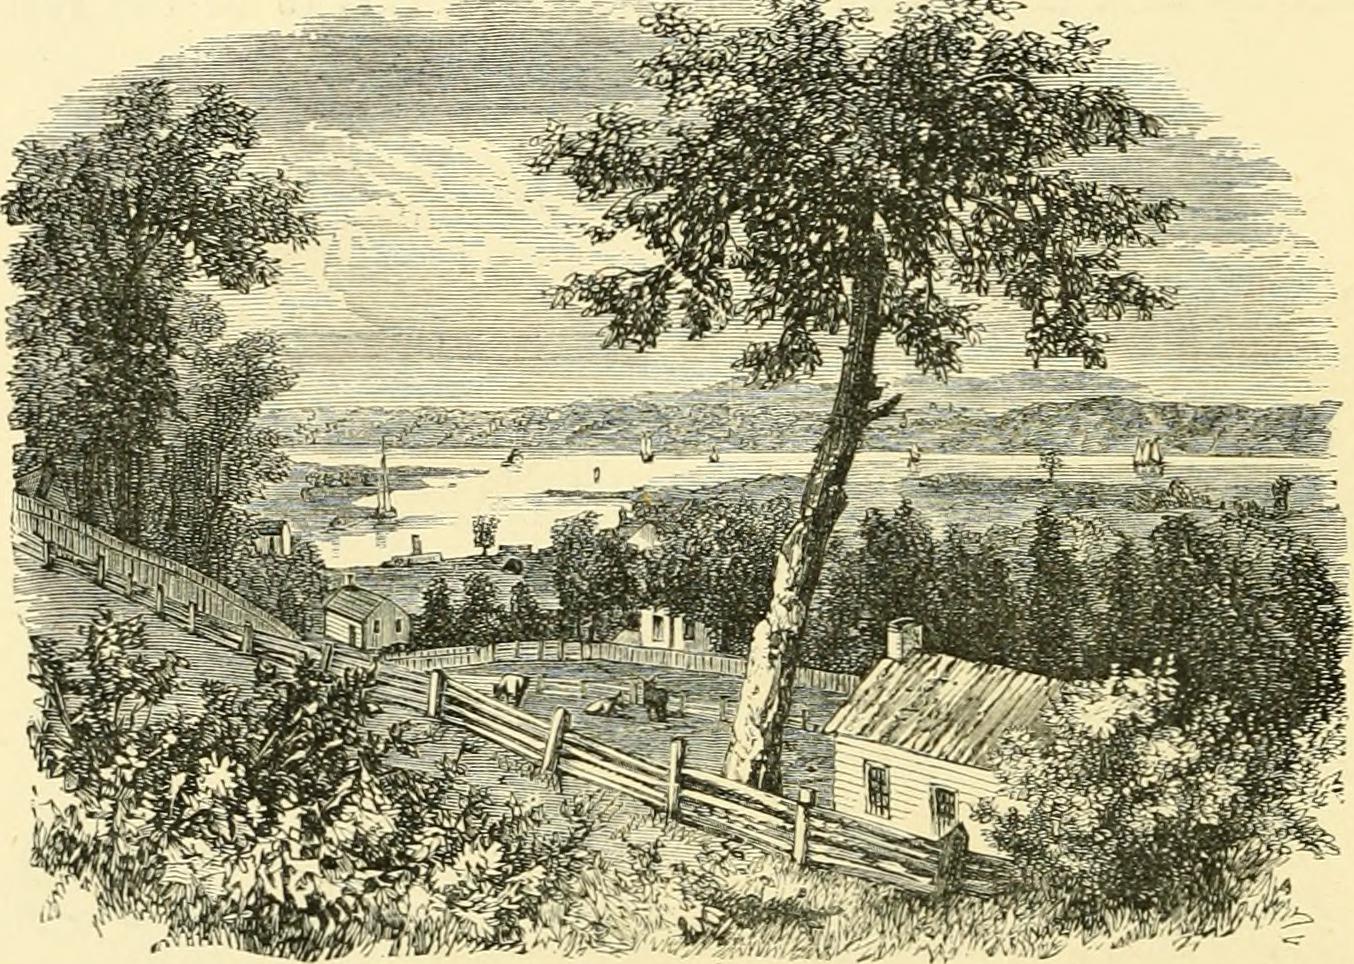 Image from page 185 of "The Hudson, from the wilderness to the sea" (1866)